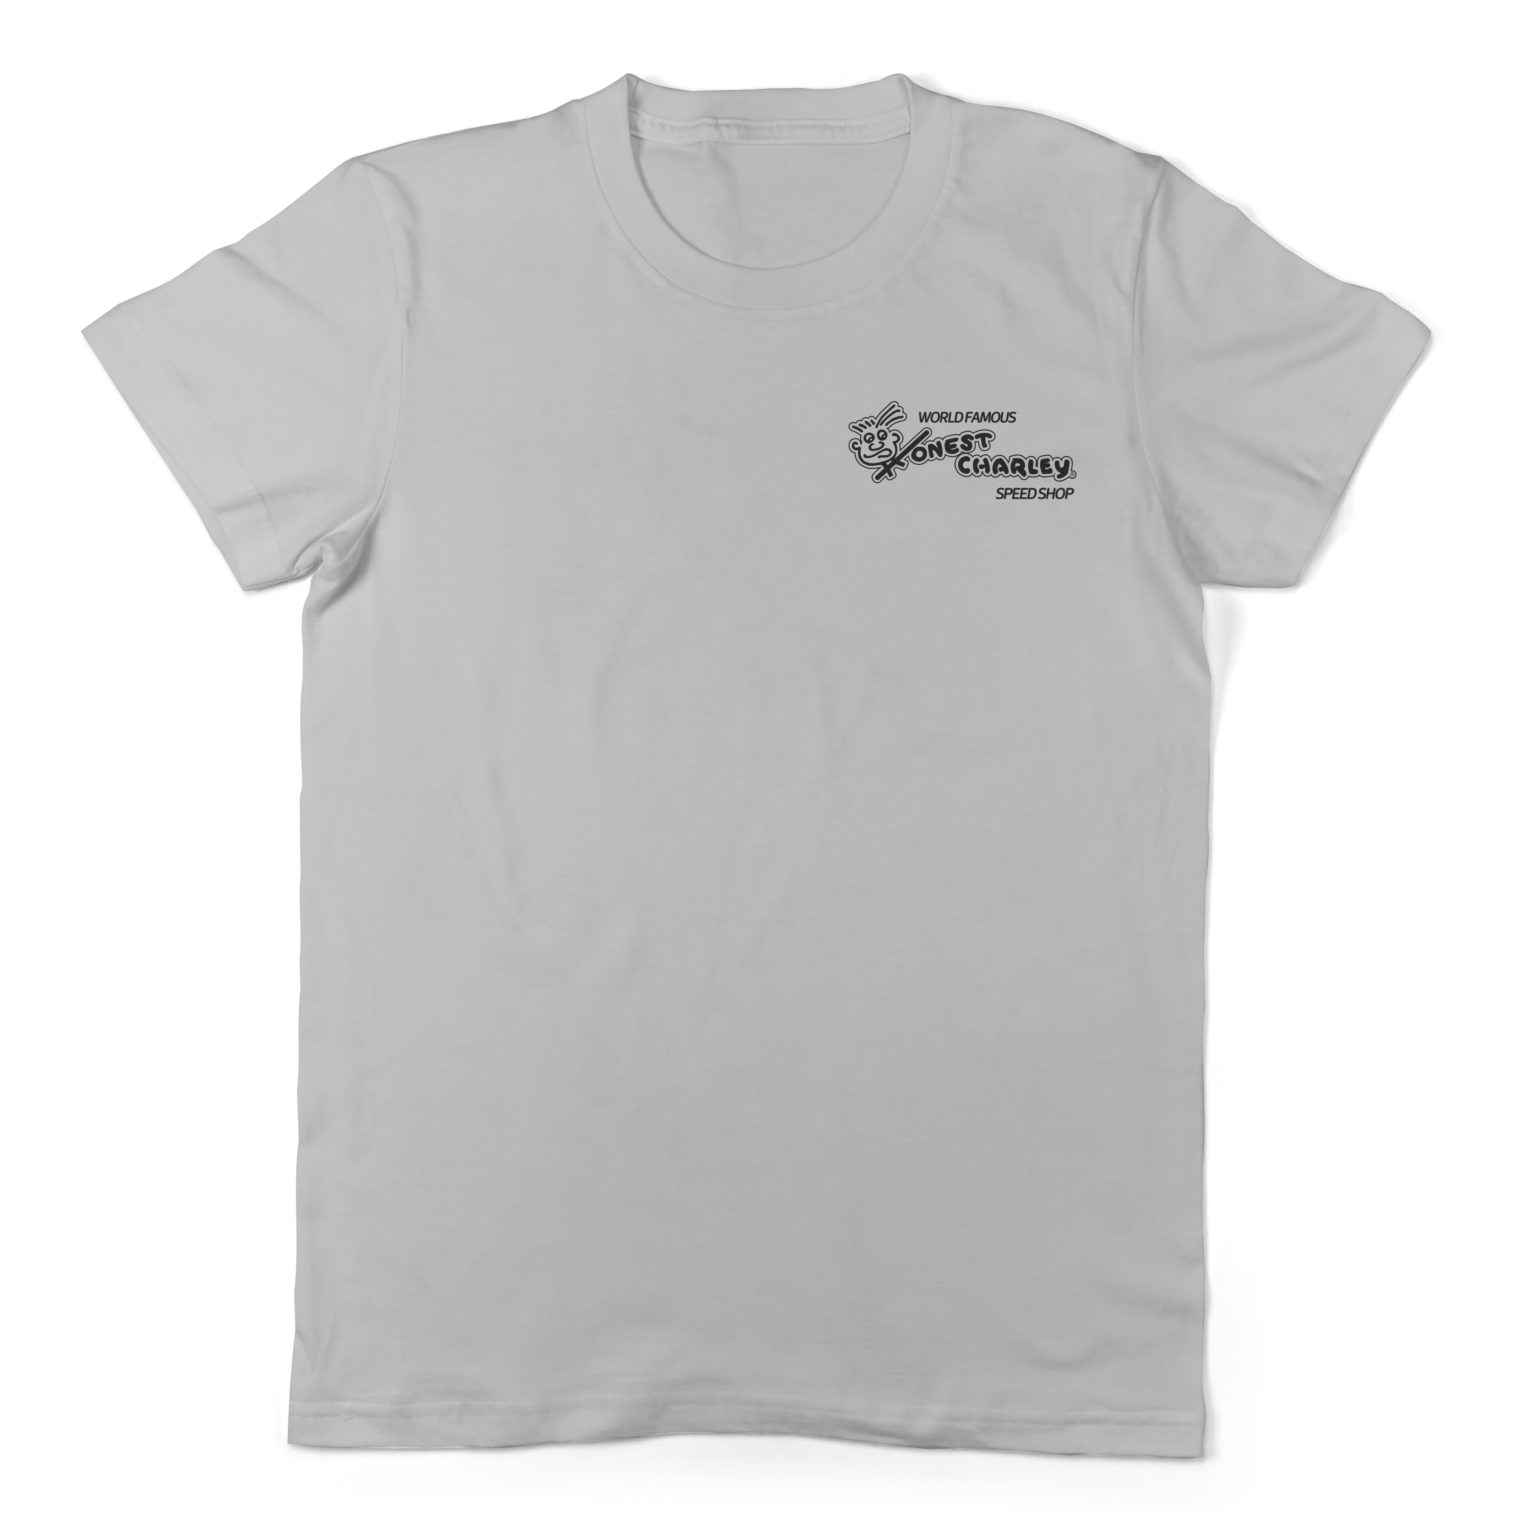 Honest Charley Speed Shop Store Front T-Shirt - Honest Charley Speed Shop